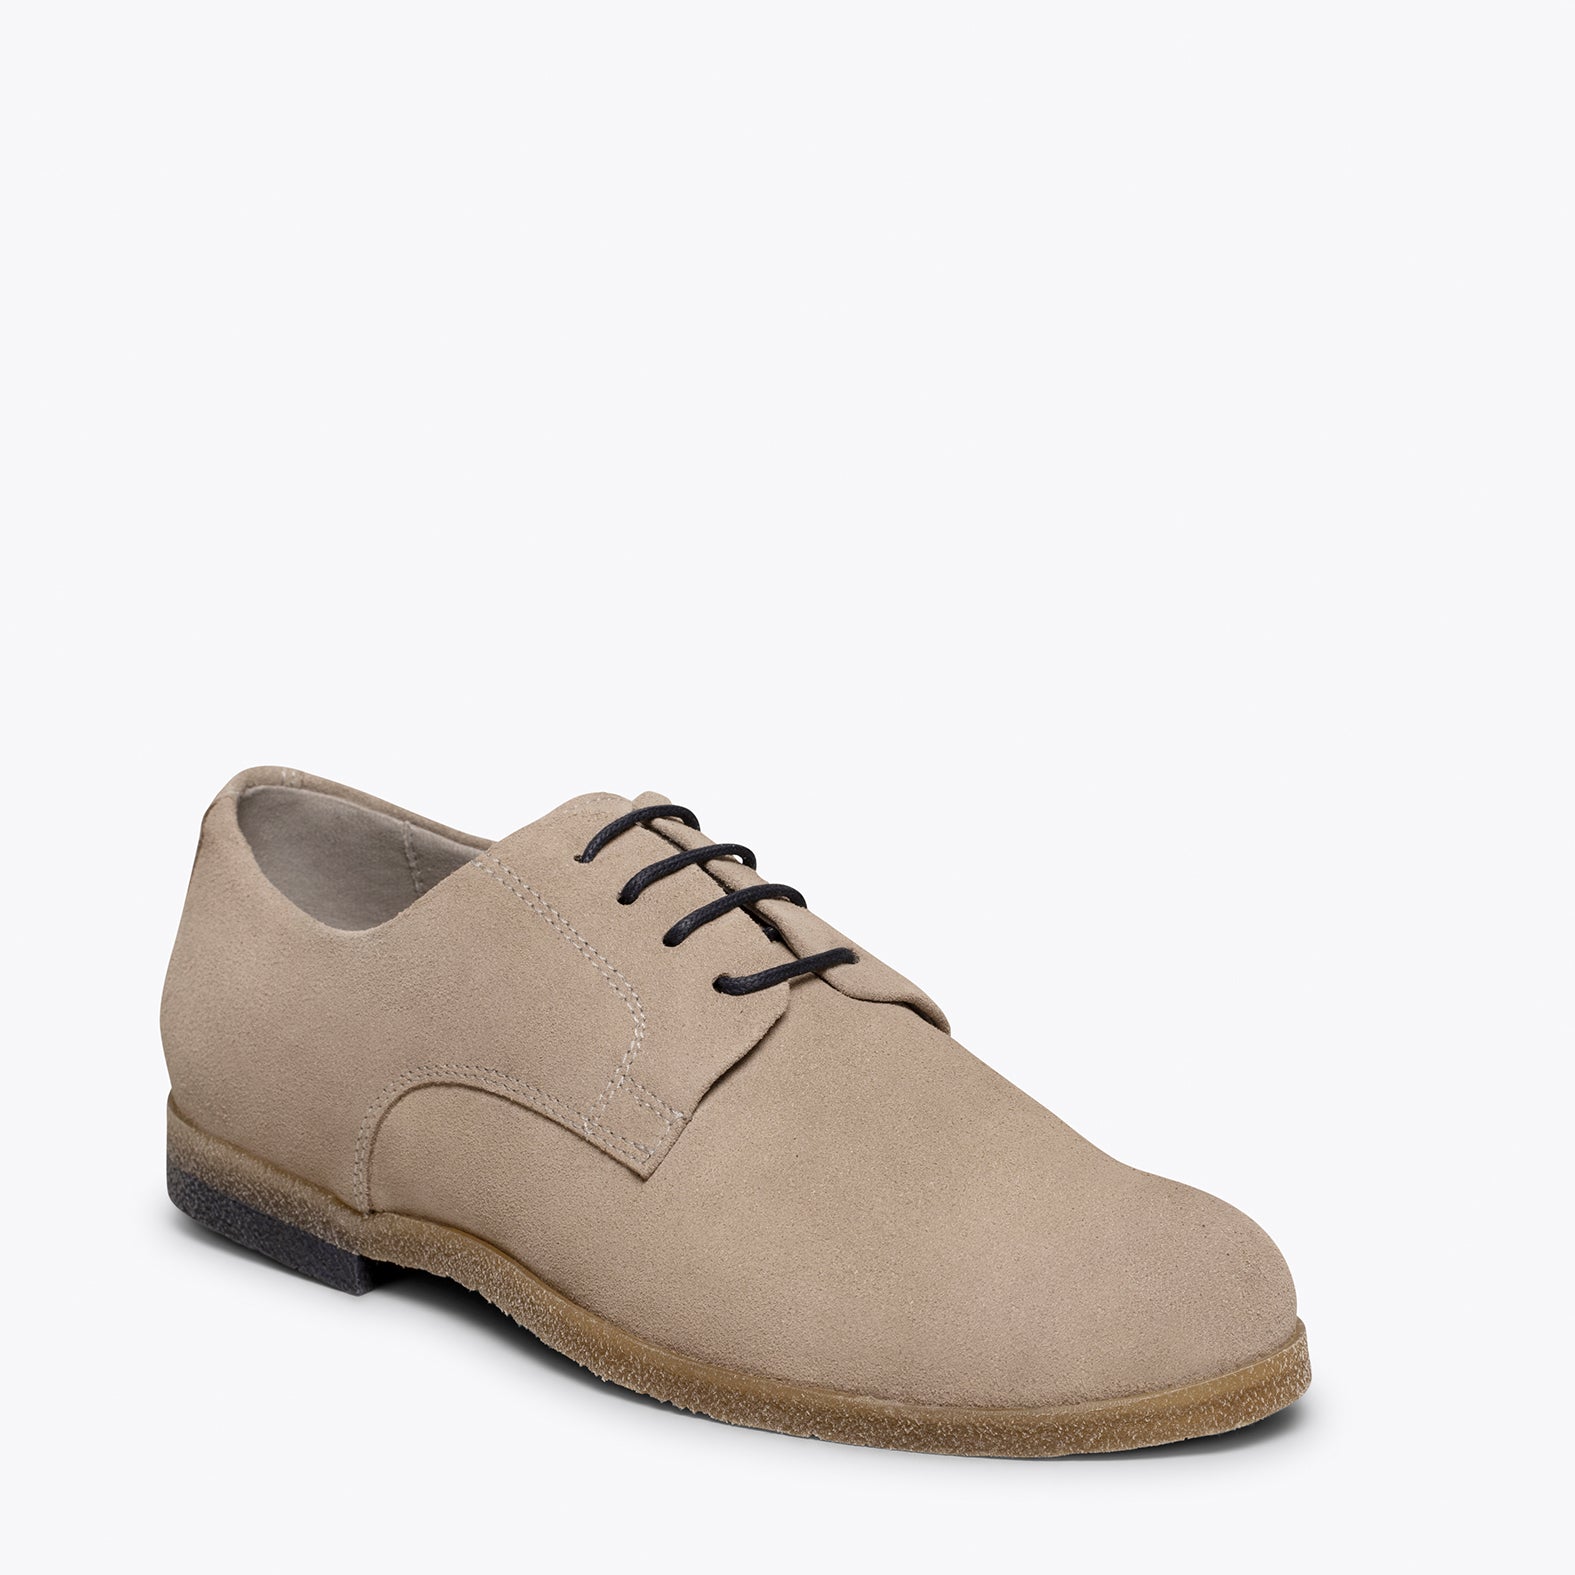 BLUCHER – GREY classic shoes with laces